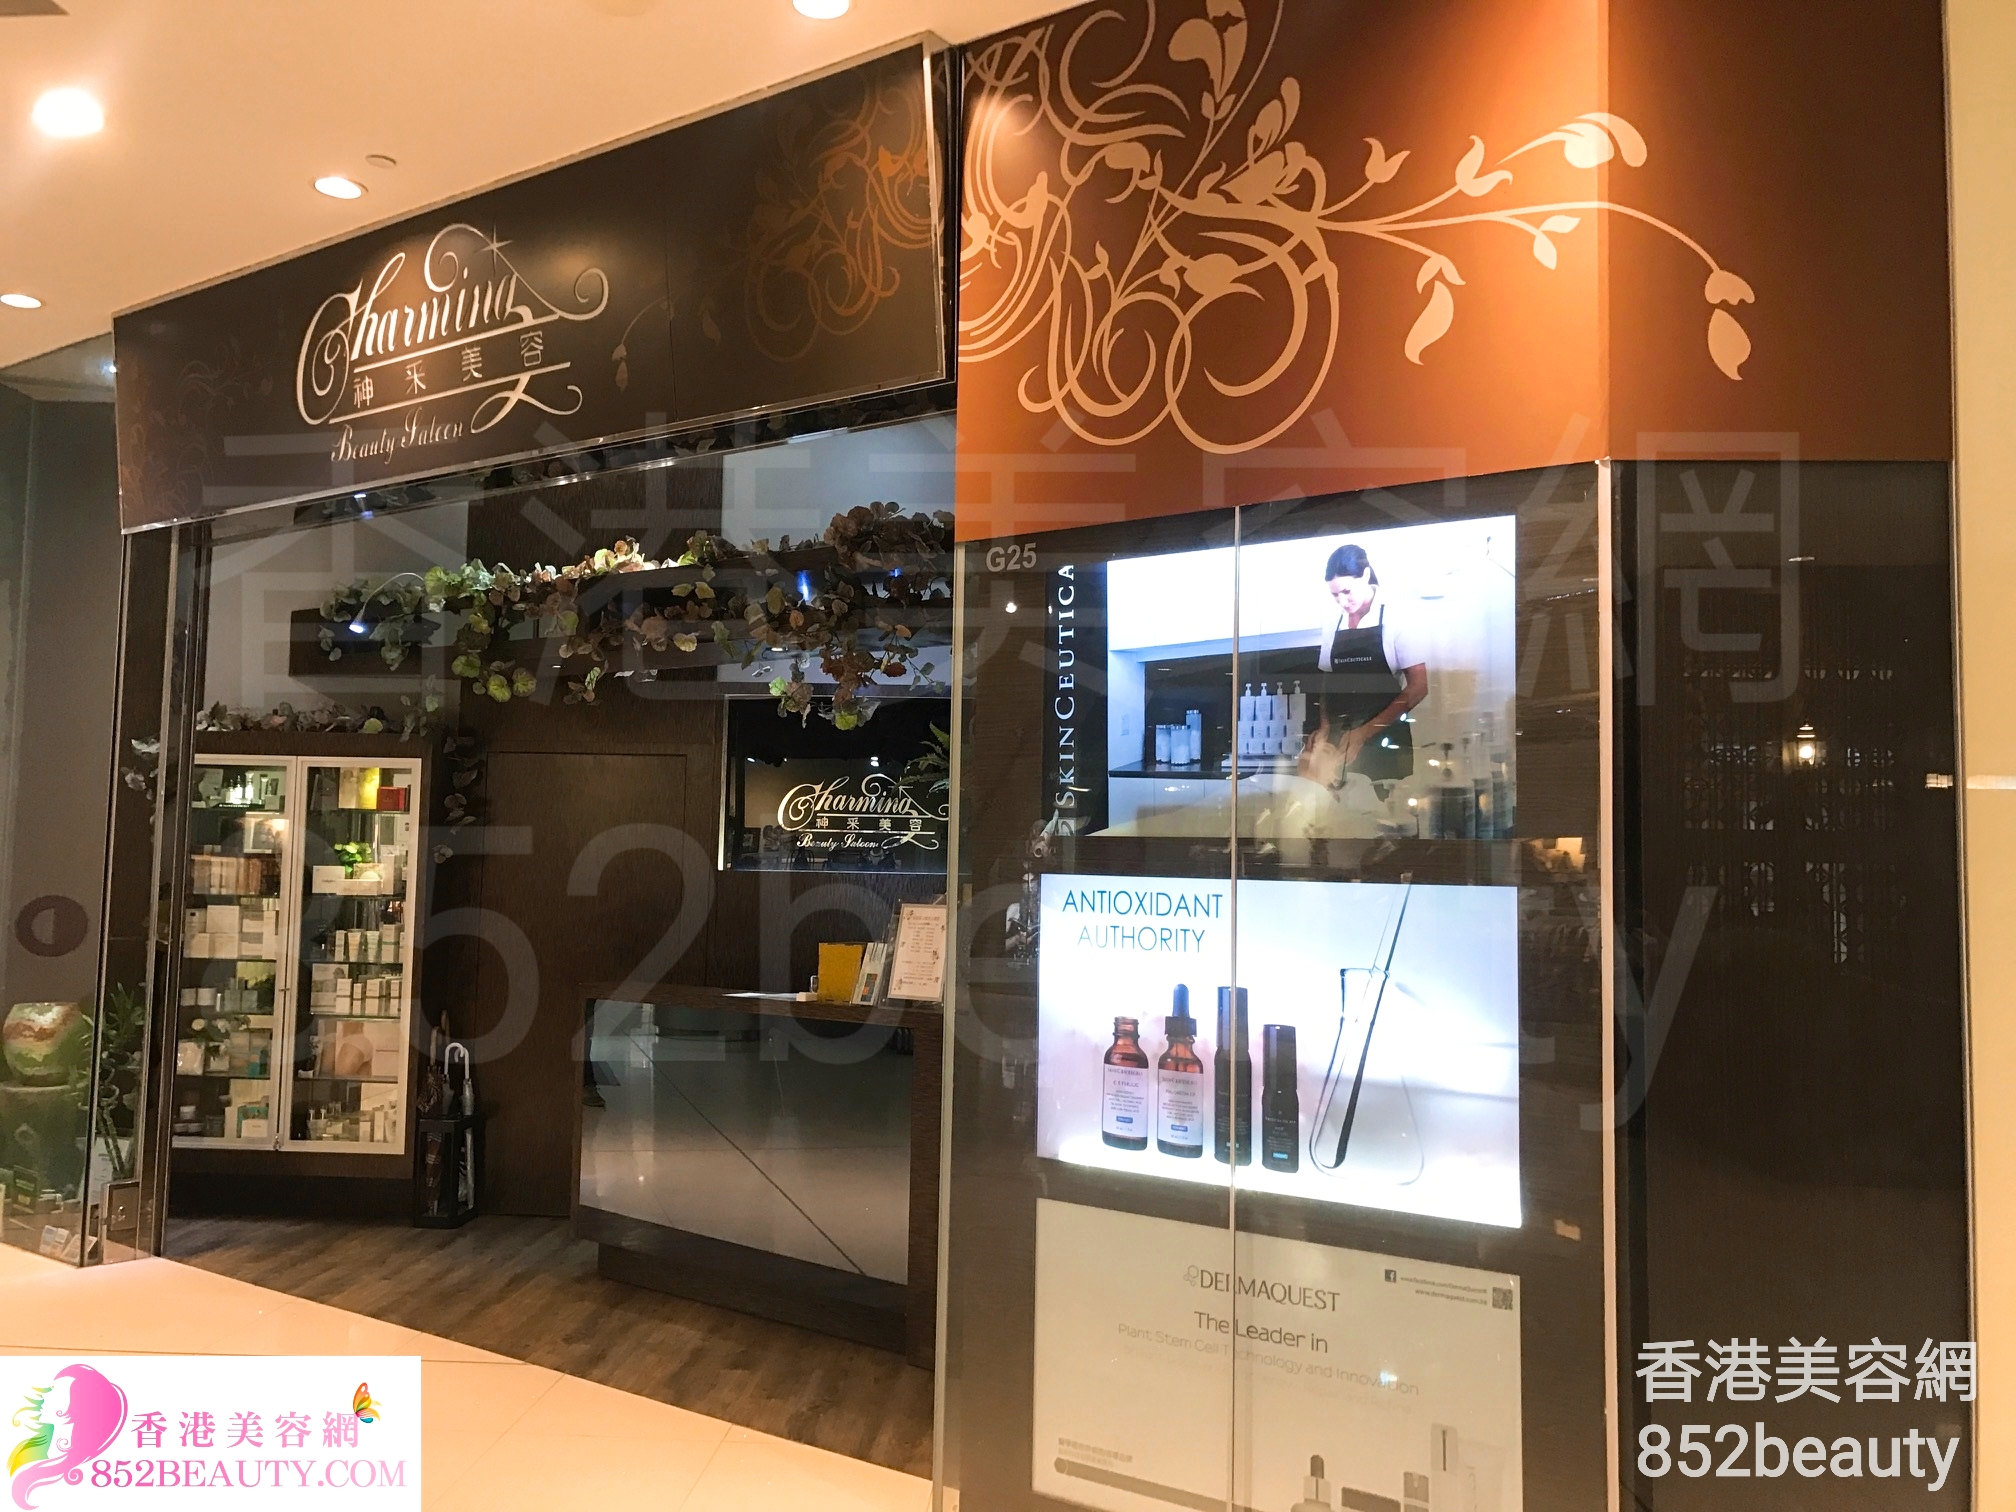 Hand and foot care: Charming Beauty Salon 神采美容 (油塘店)